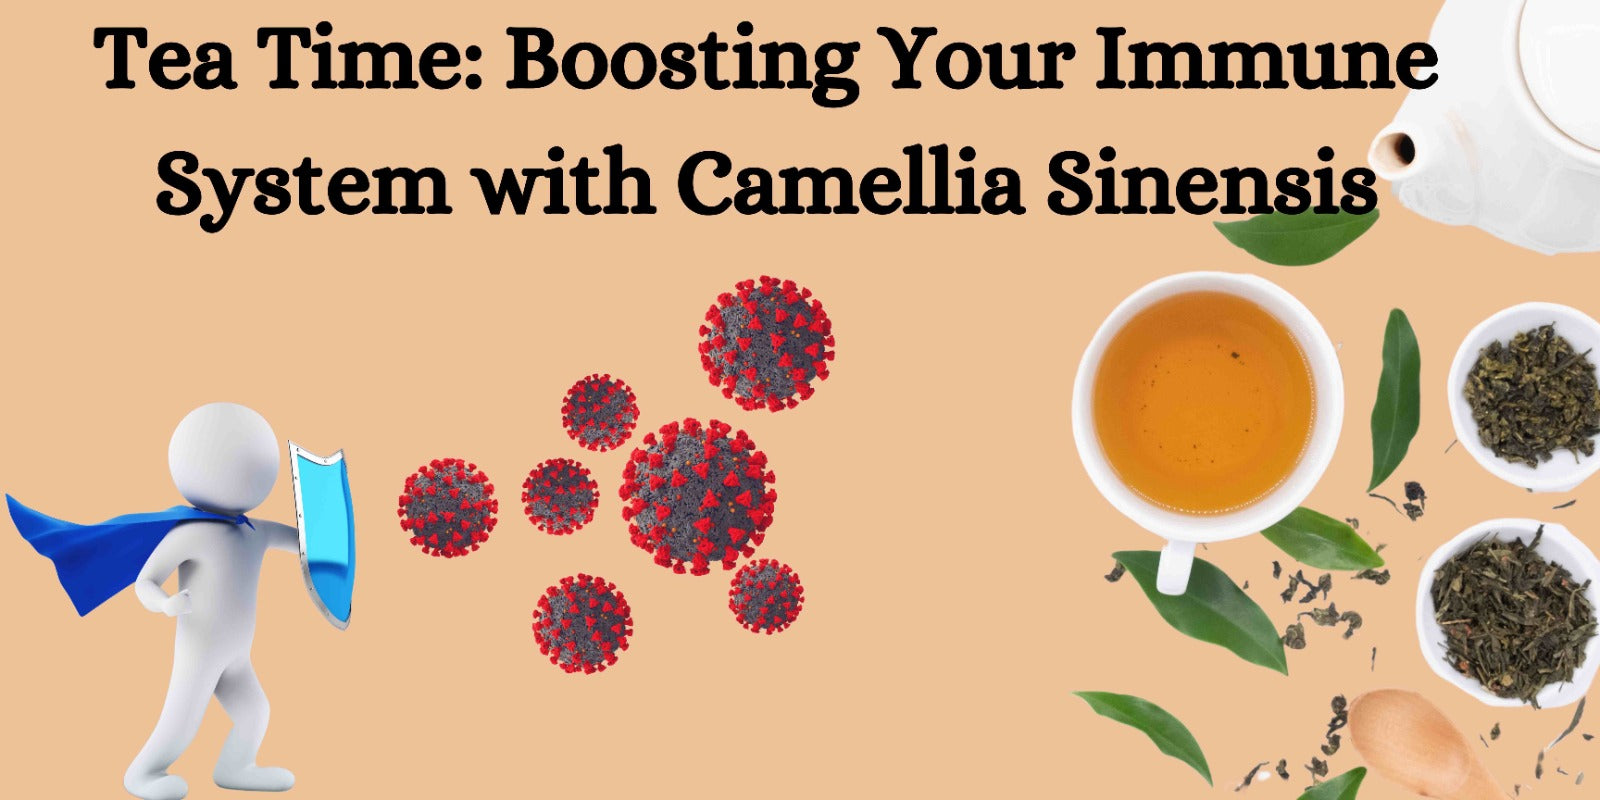 Tea Time: Boosting Your Immune System with Camellia Sinensis